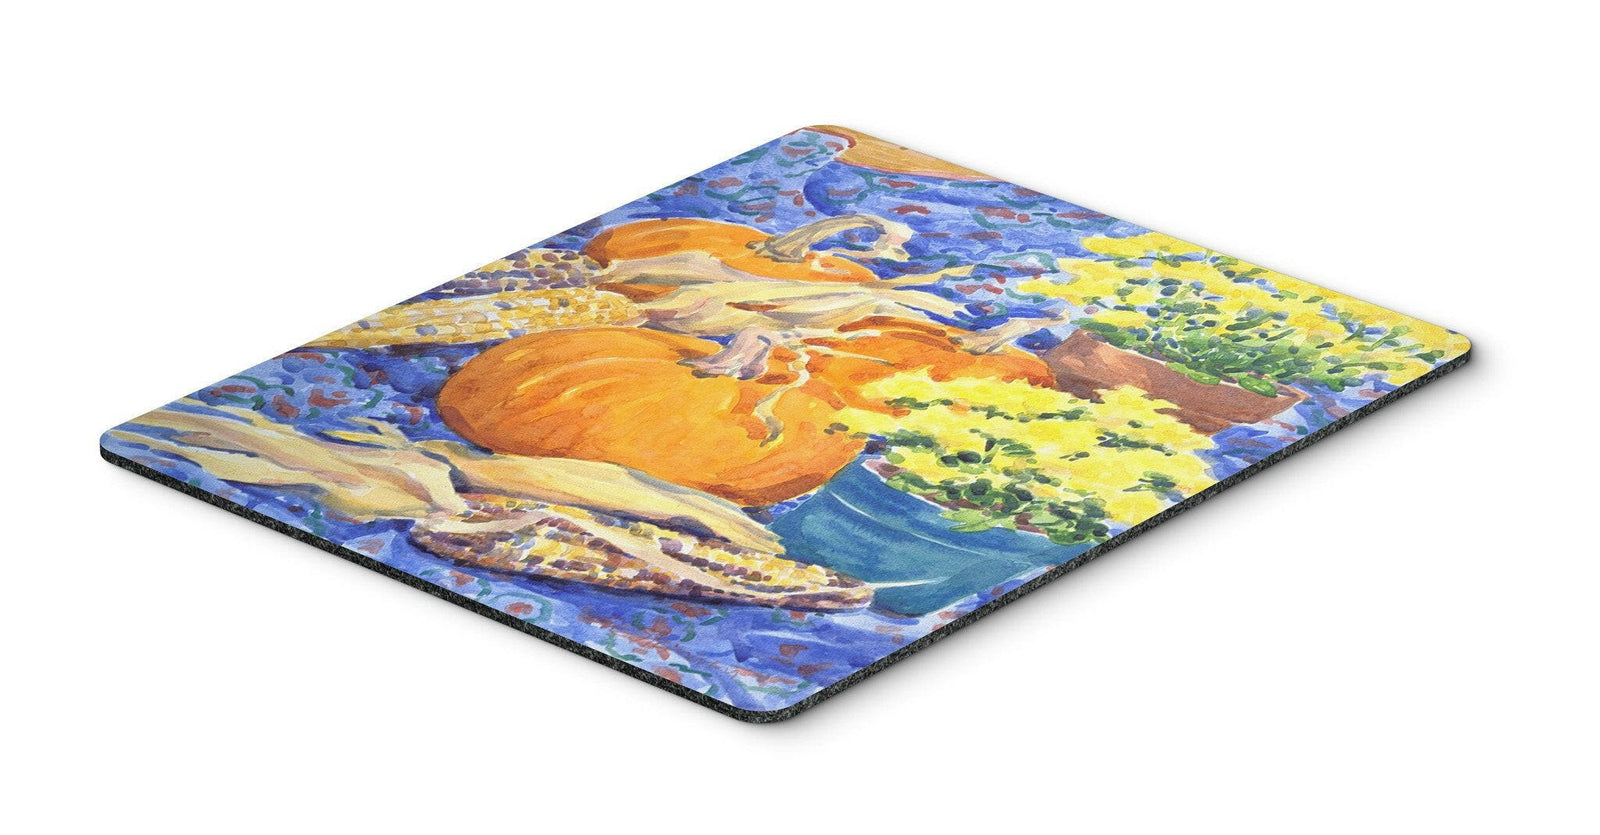 Flower - Mums Mouse Pad, Hot Pad or Trivet by Caroline's Treasures